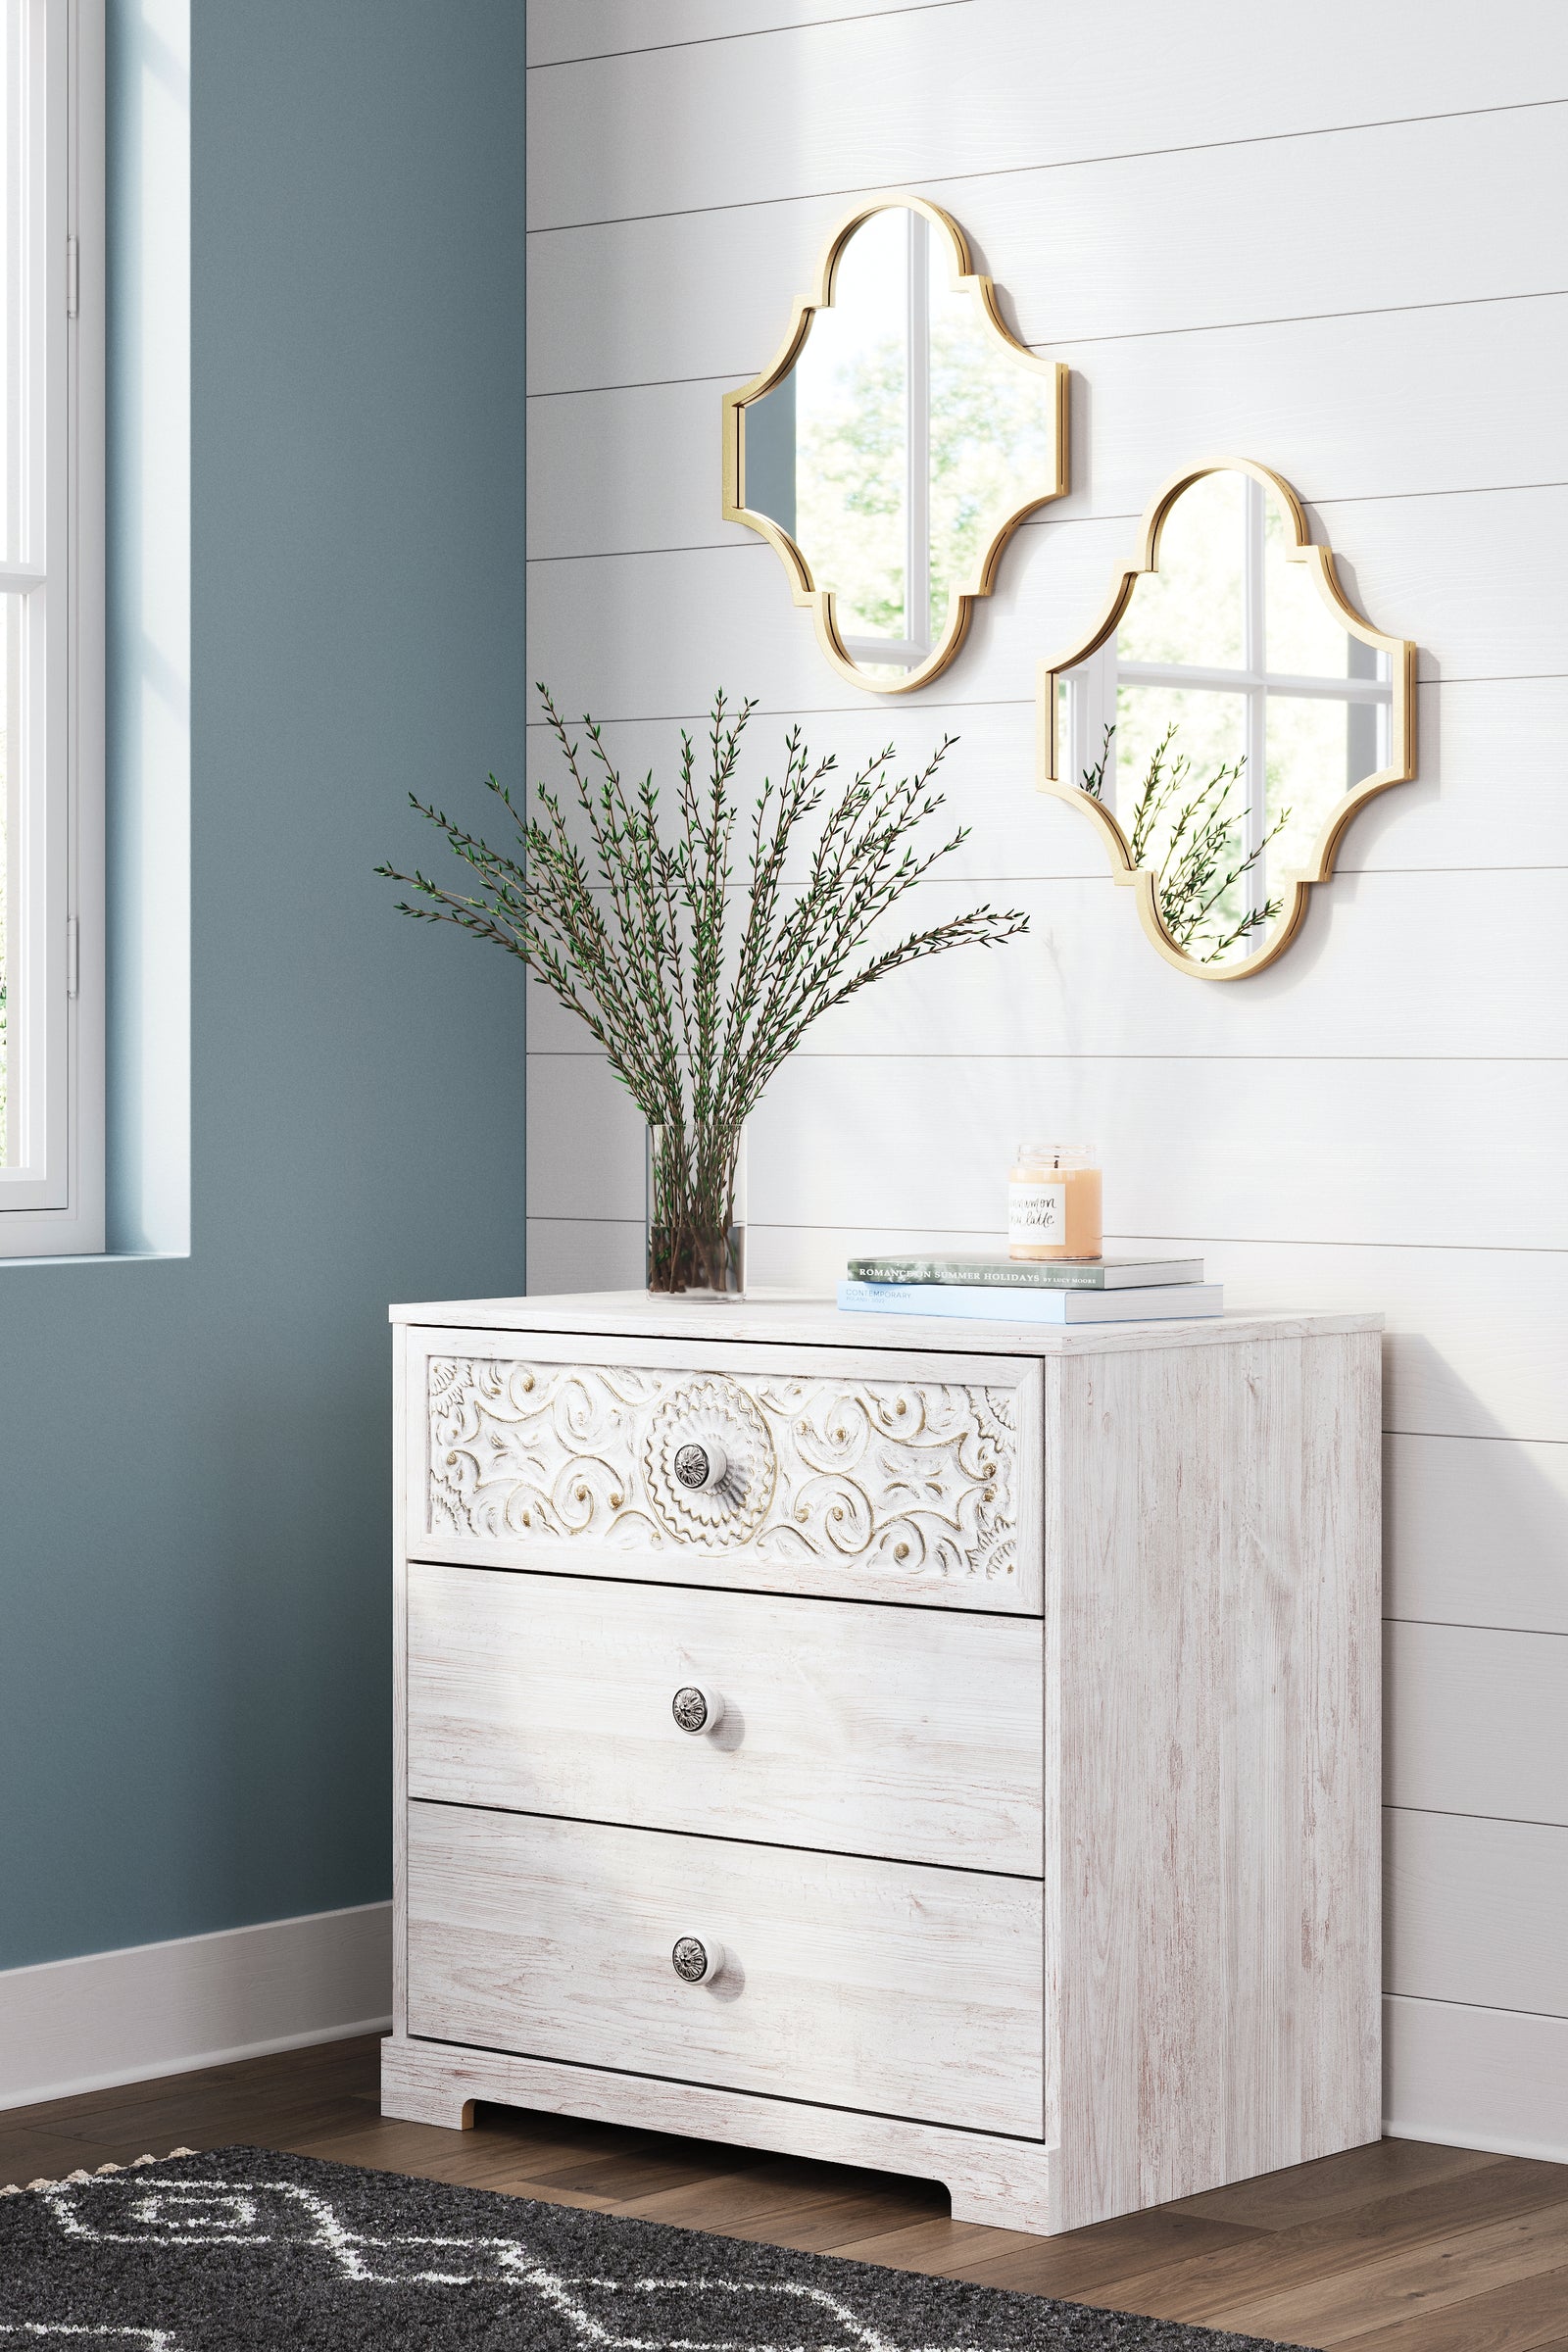 Paxberry Whitewash Chest Of Drawers